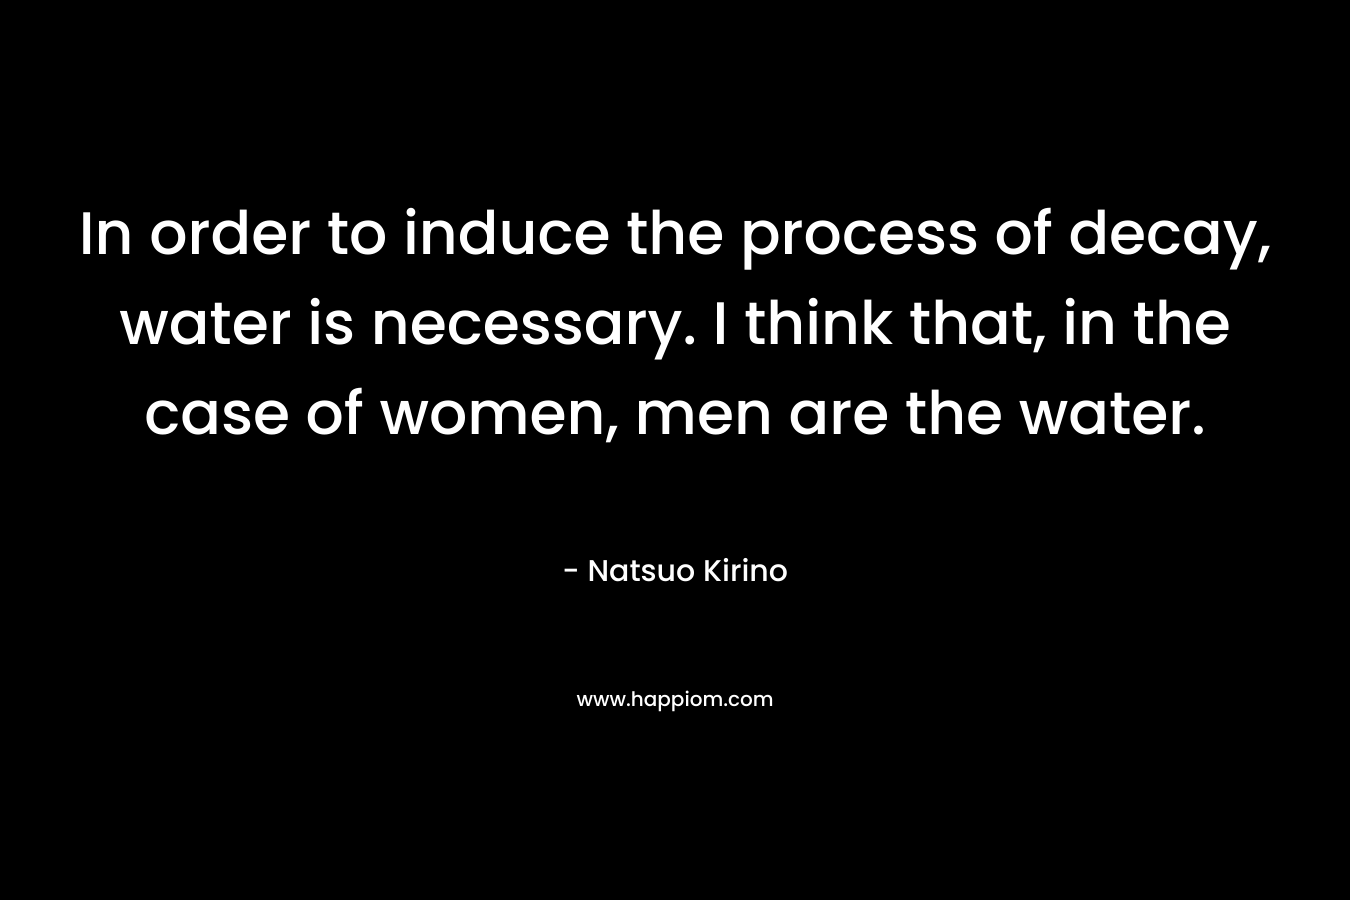 In order to induce the process of decay, water is necessary. I think that, in the case of women, men are the water.